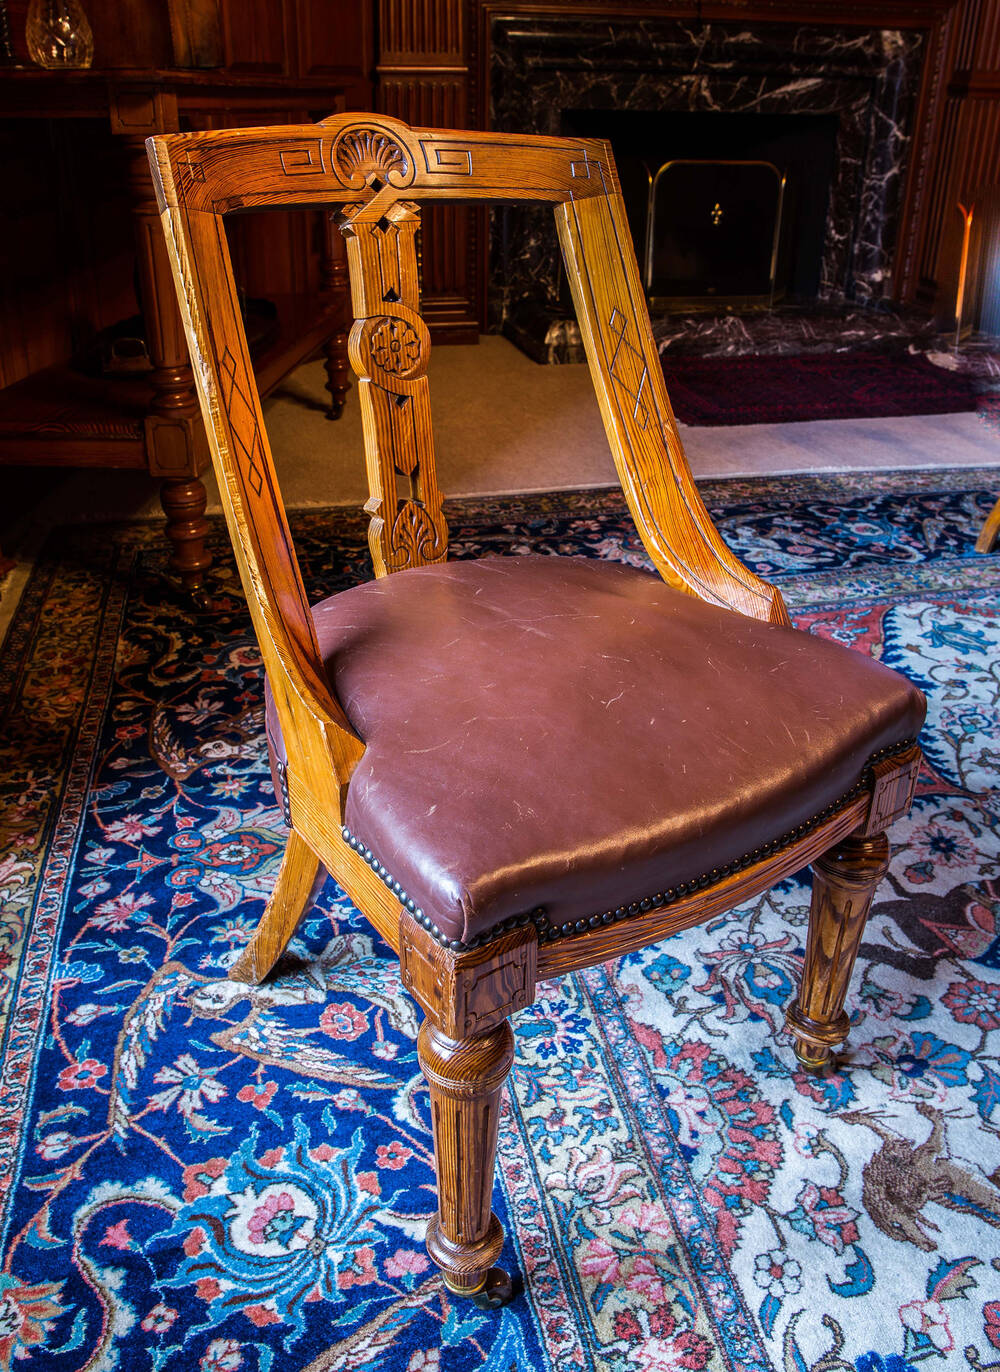 A chair from the set